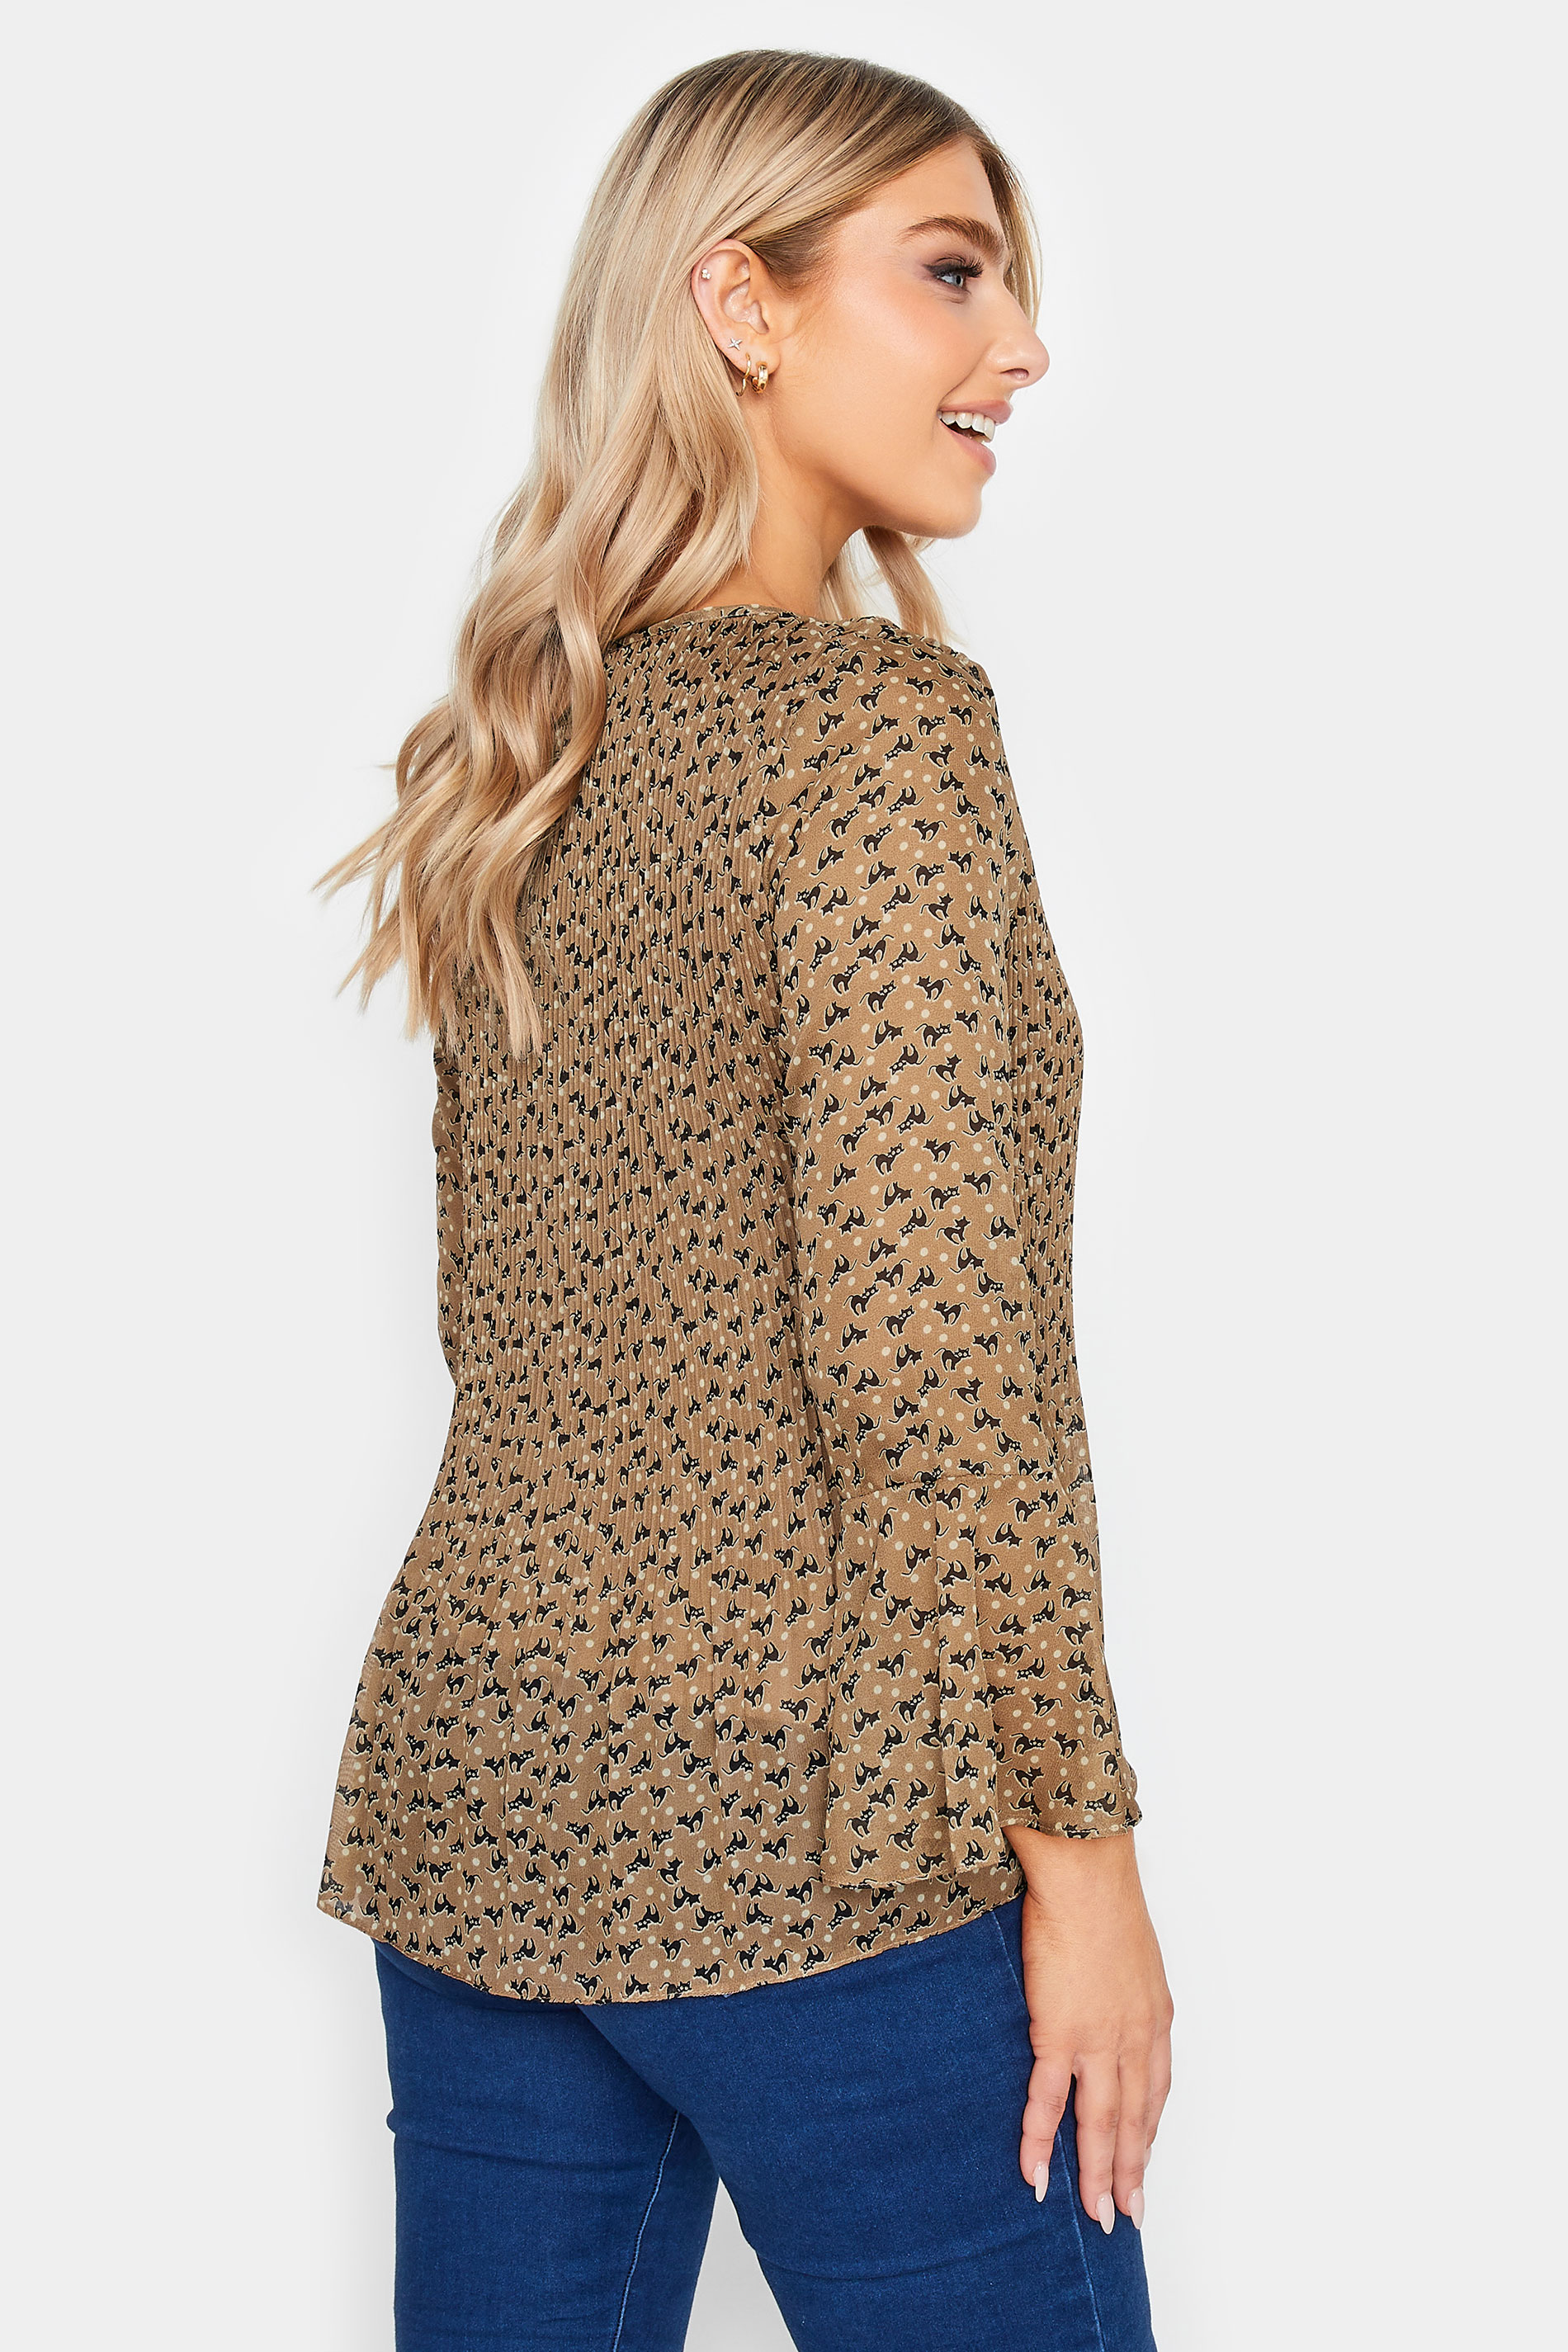 M&Co Brown Cat Print Pleated Blouse | M&Co 3